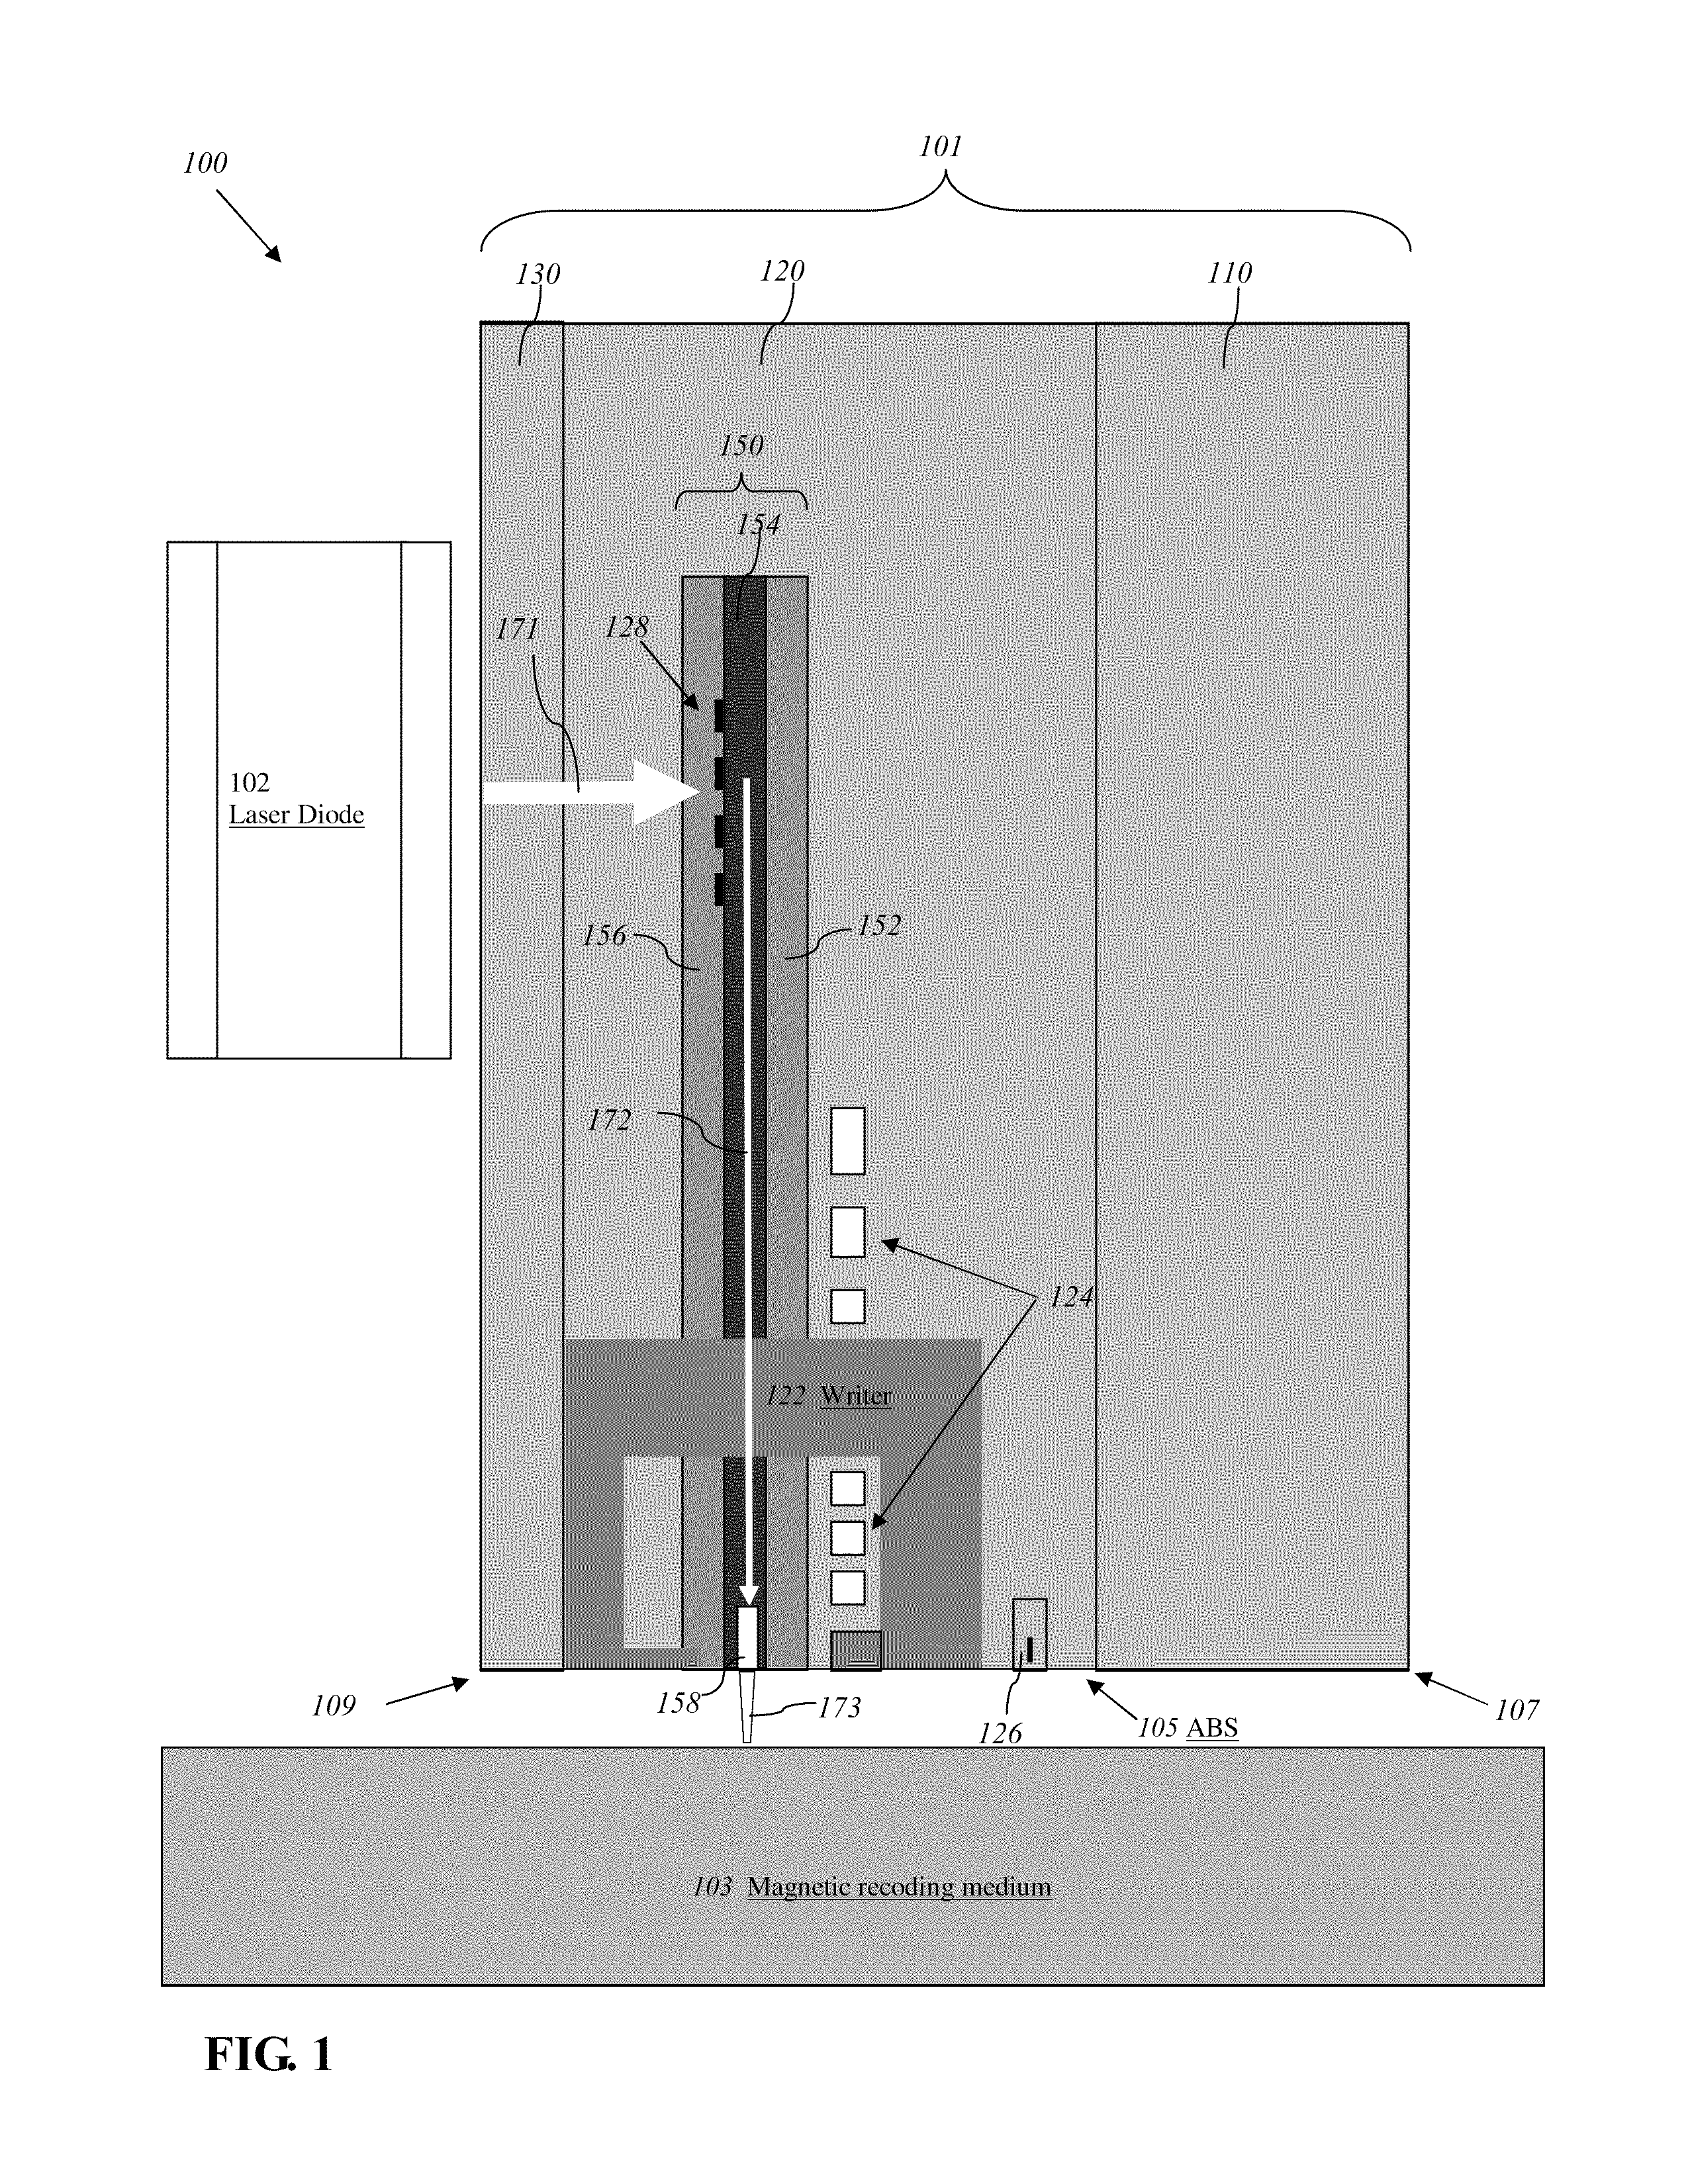 Reducing thermal protrusion of a near field transducer in an energy assisted magnetic recording head